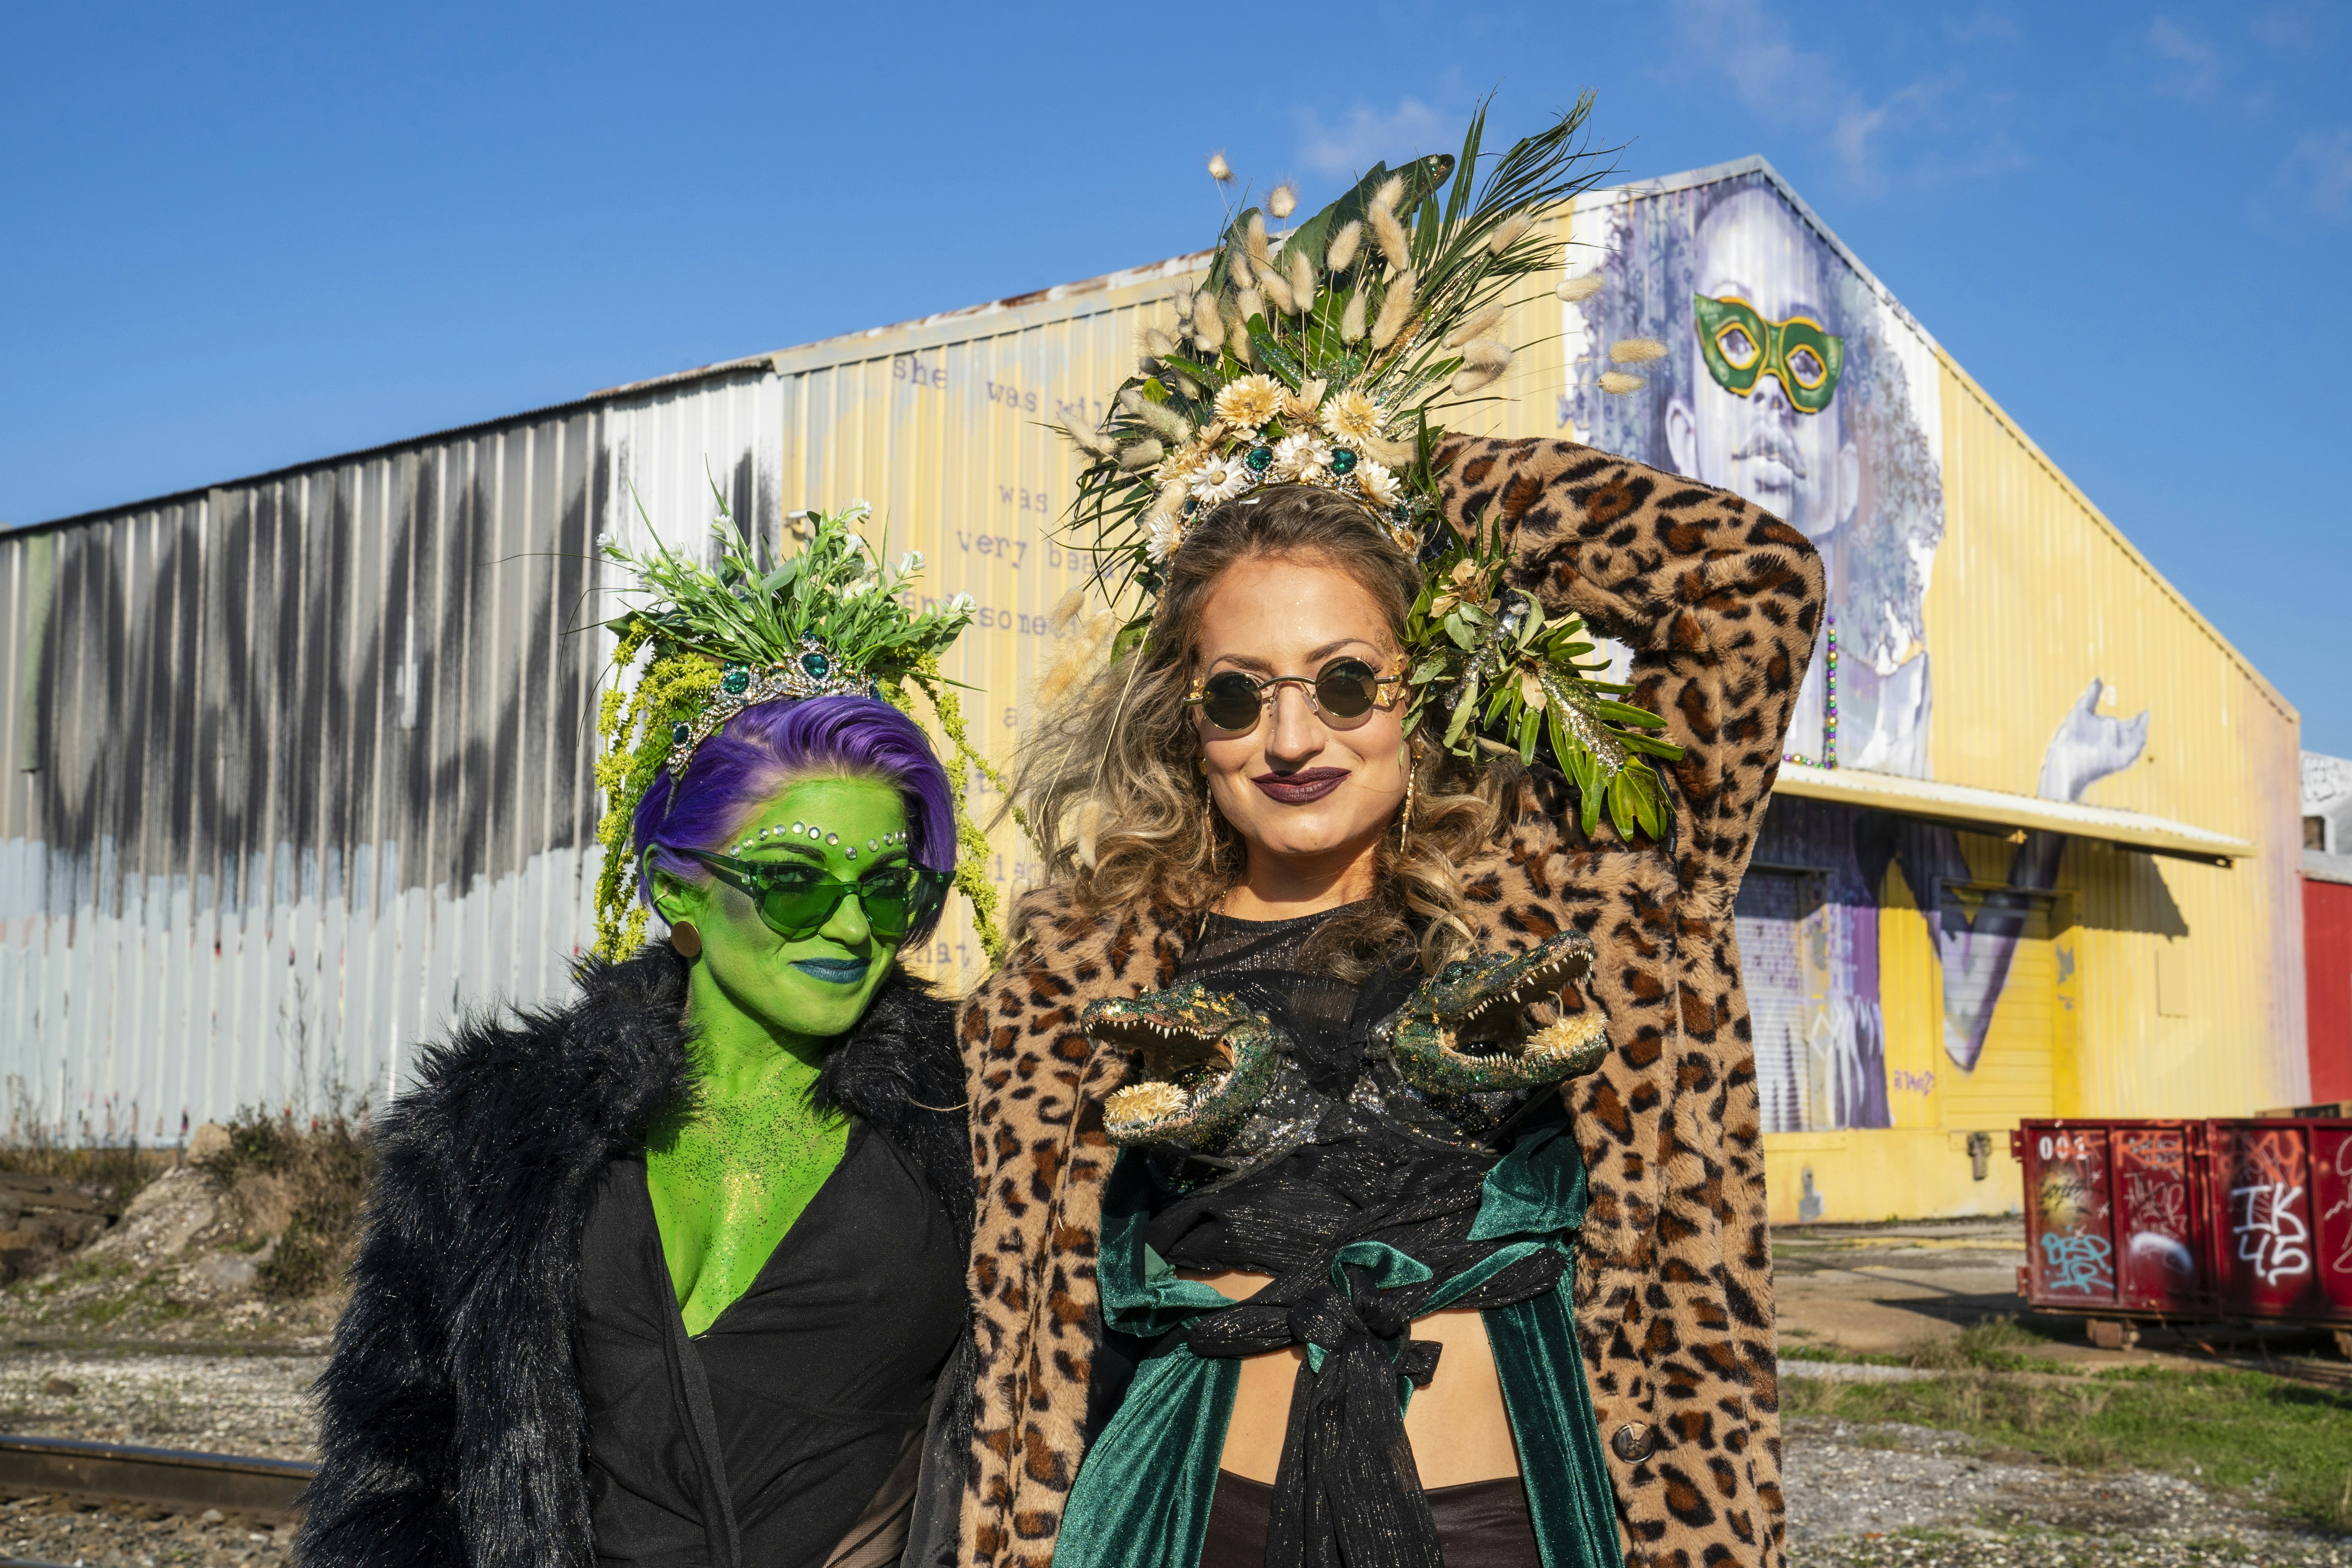 Costumed revelers pose for a photo during Mardi Gras. One woman is painted green and the other is wearing leopard print. 